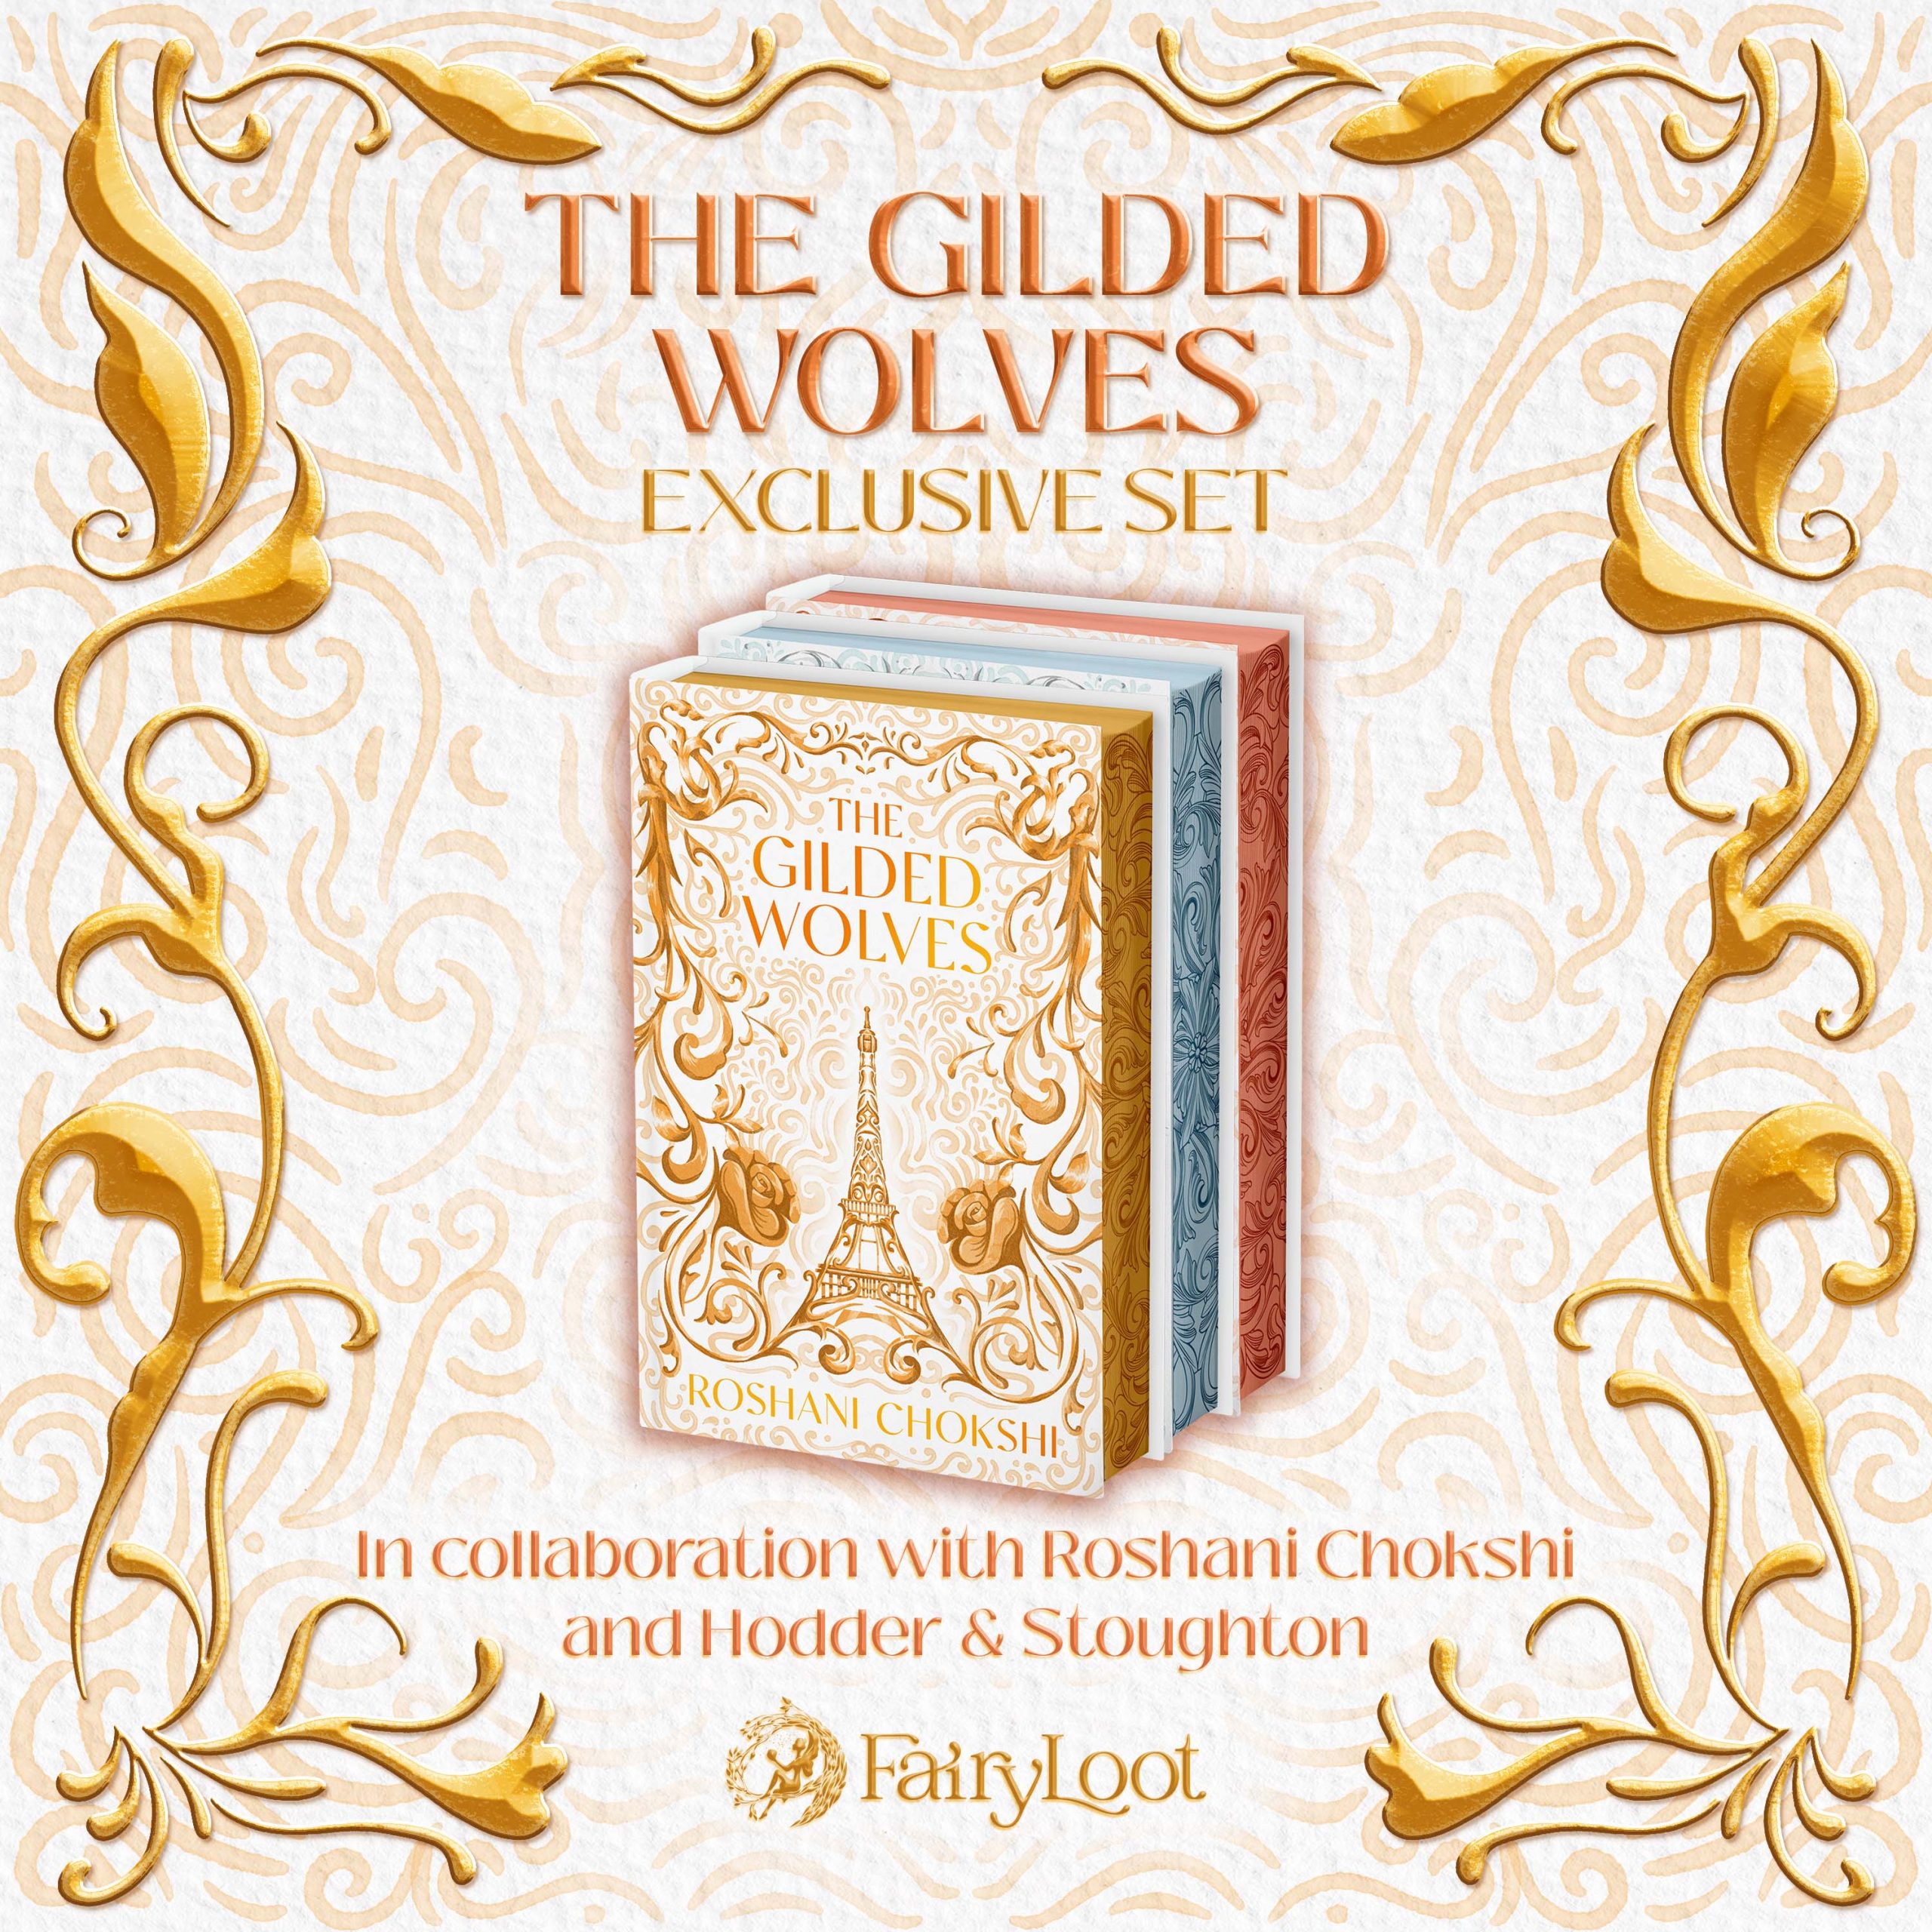 The Gilded Wolves Exclusive Set